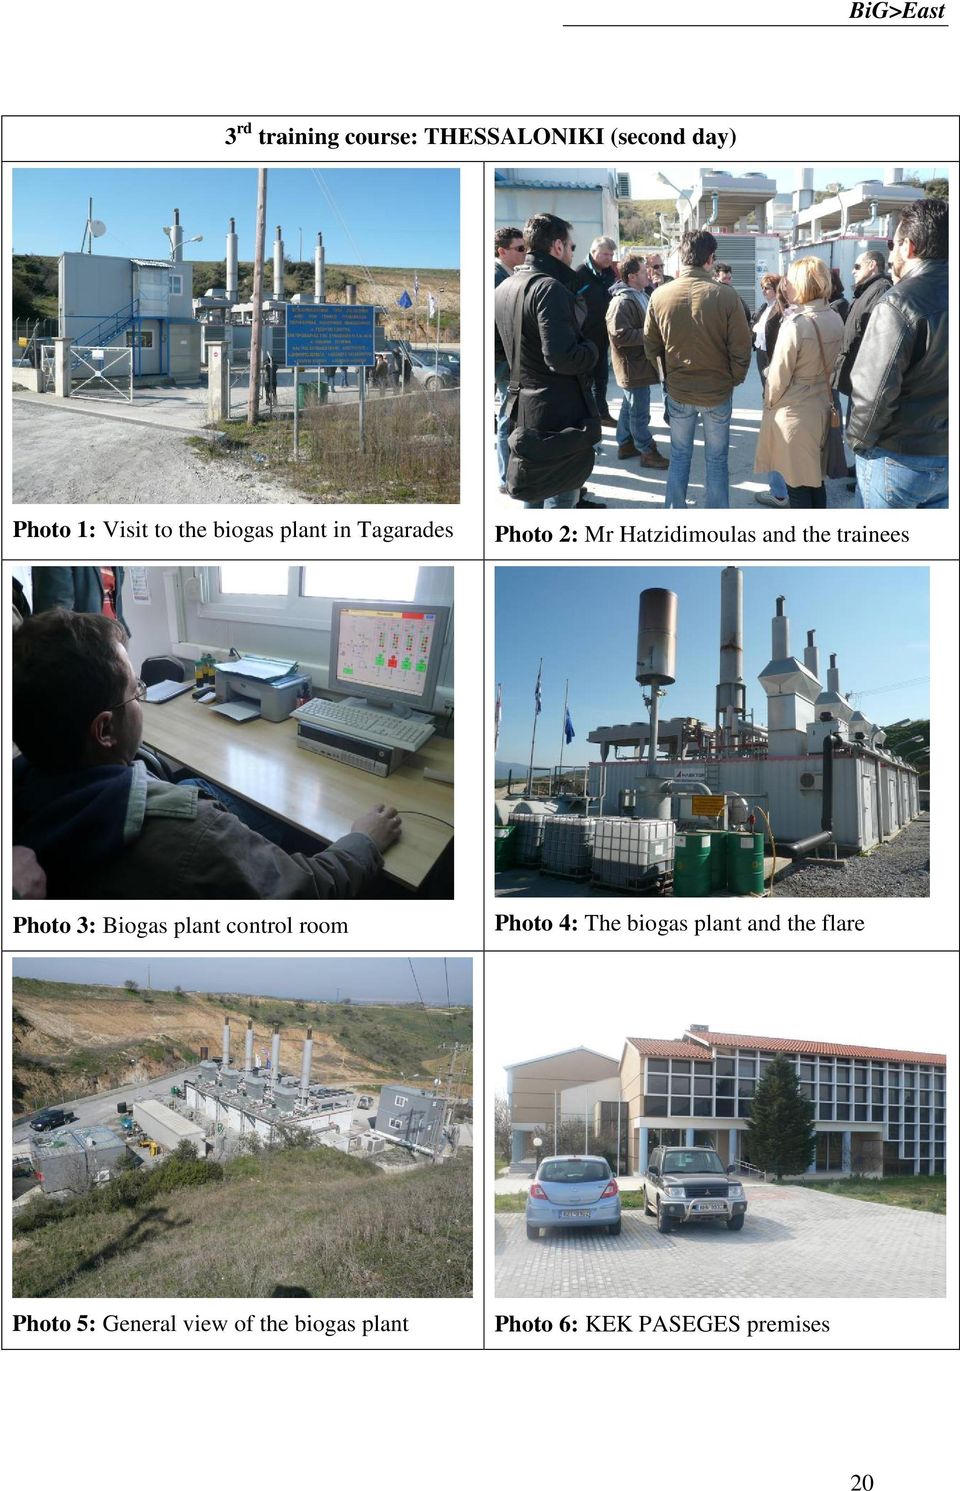 Photo 3: Biogas plant control room Photo 4: The biogas plant and the